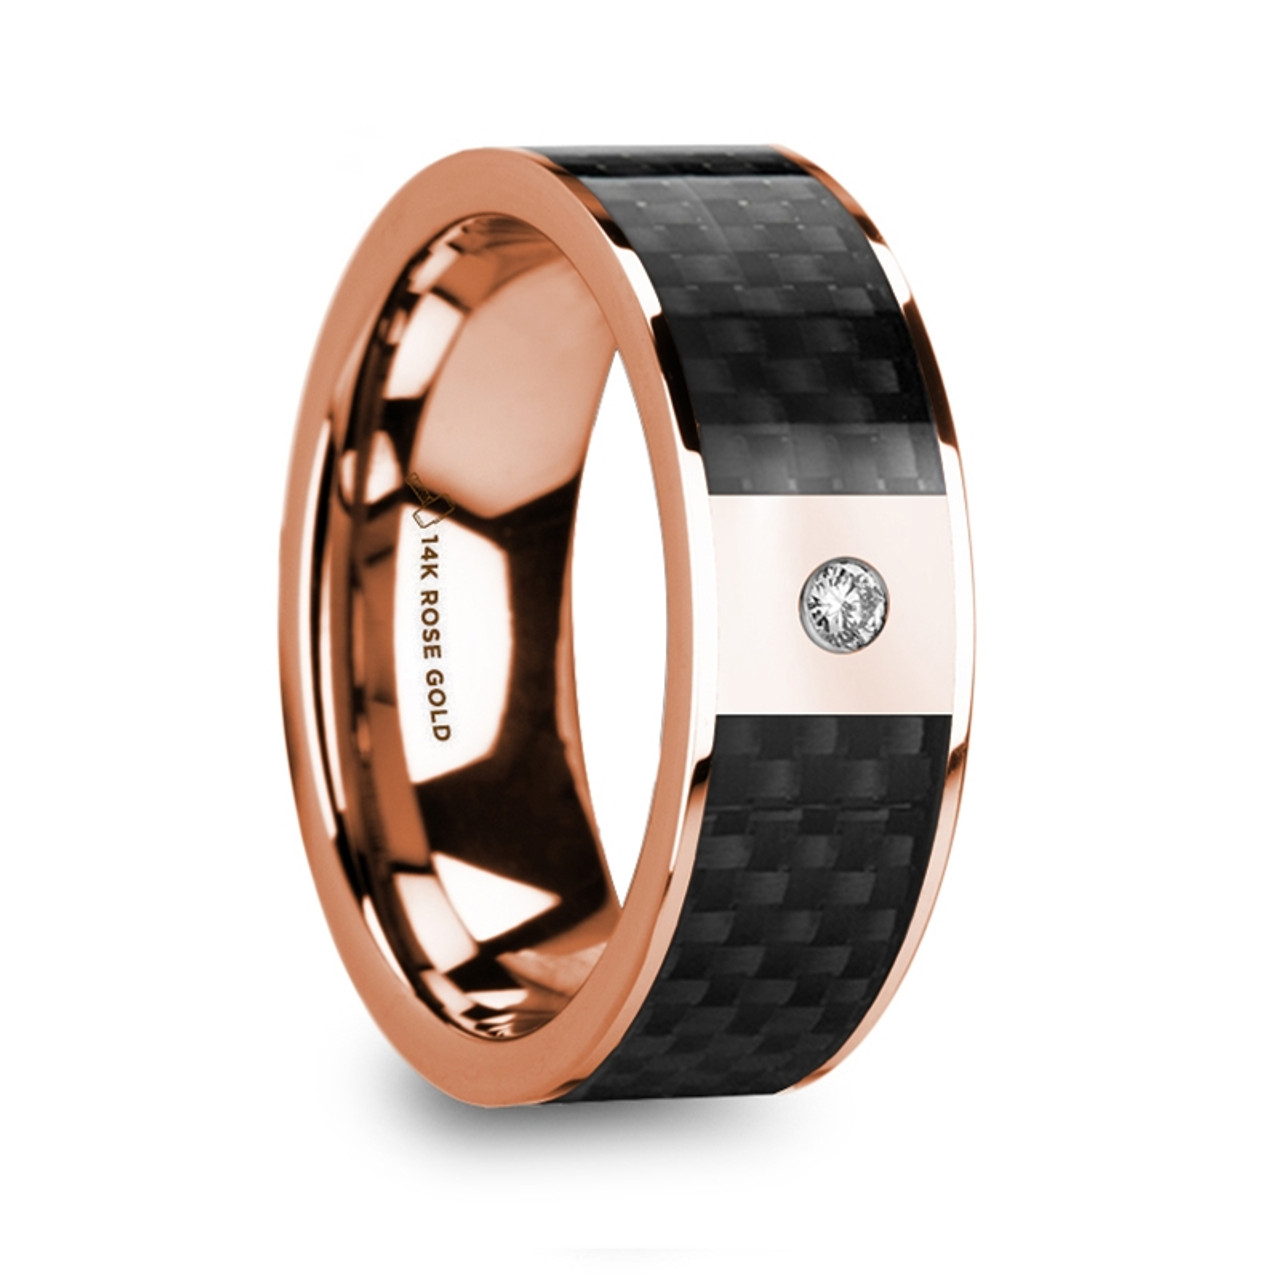 HERMES Black Carbon Fiber Inlaid 14K Rose Gold Polished Ring with Diamond  Accent - 8mm ~ (H65-182) - Roy Rose Jewelry